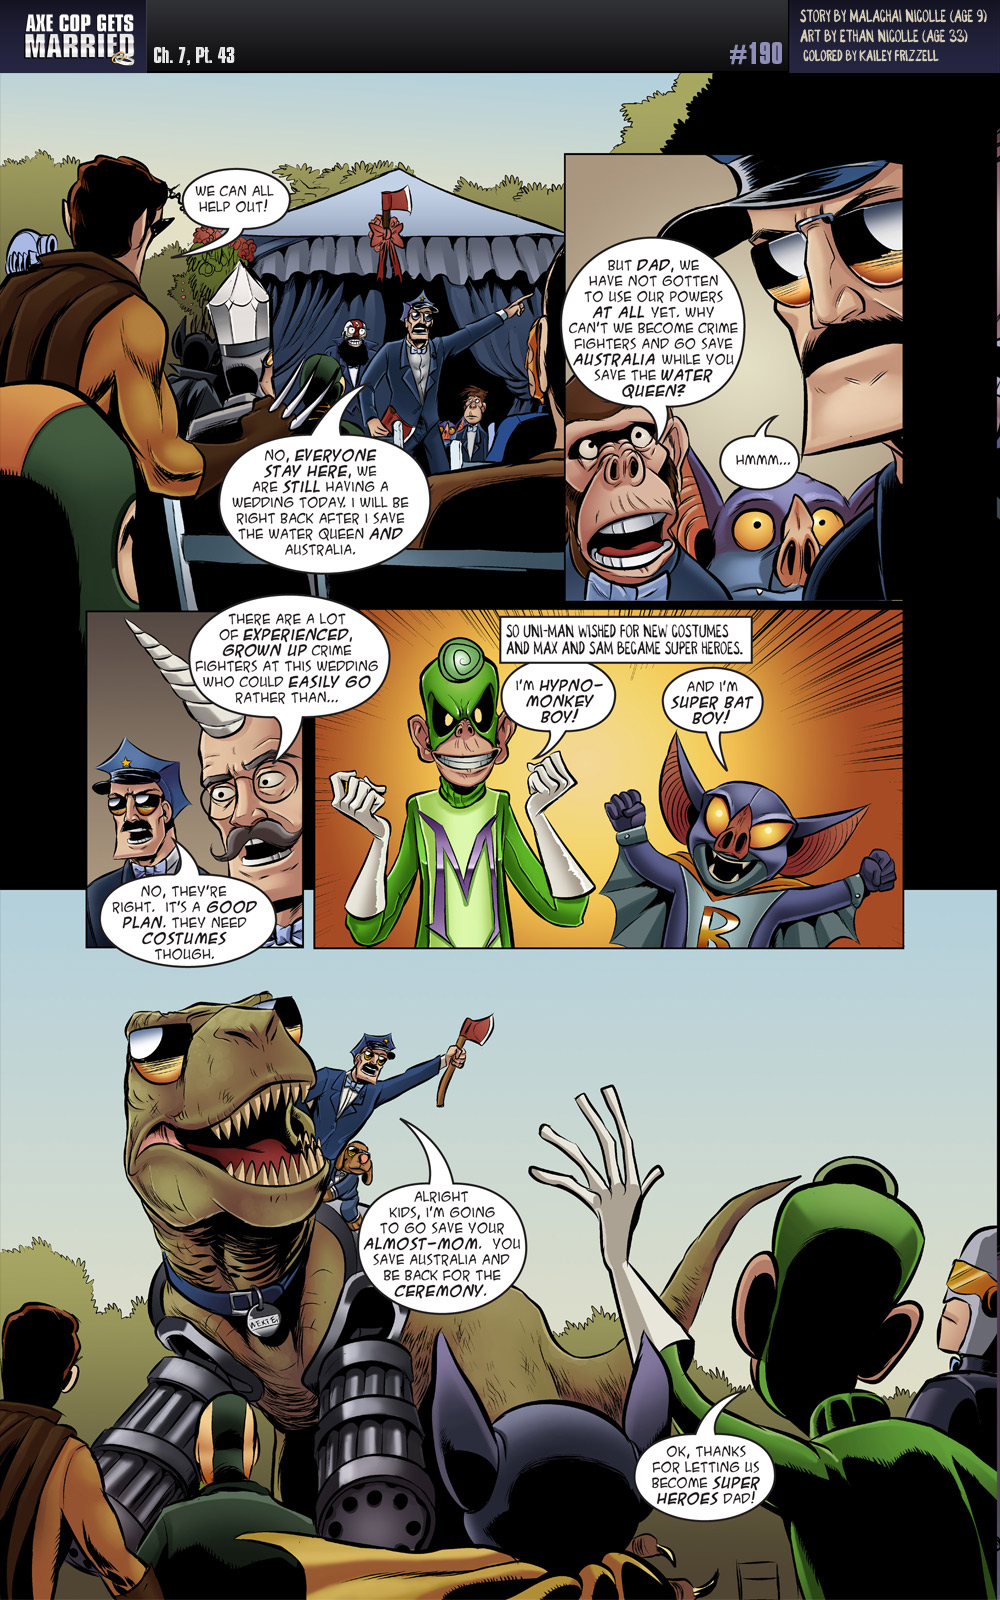 Wolver Man has not had a lot of lines in the Axe Cop series.  It's good to see him taking charge.  